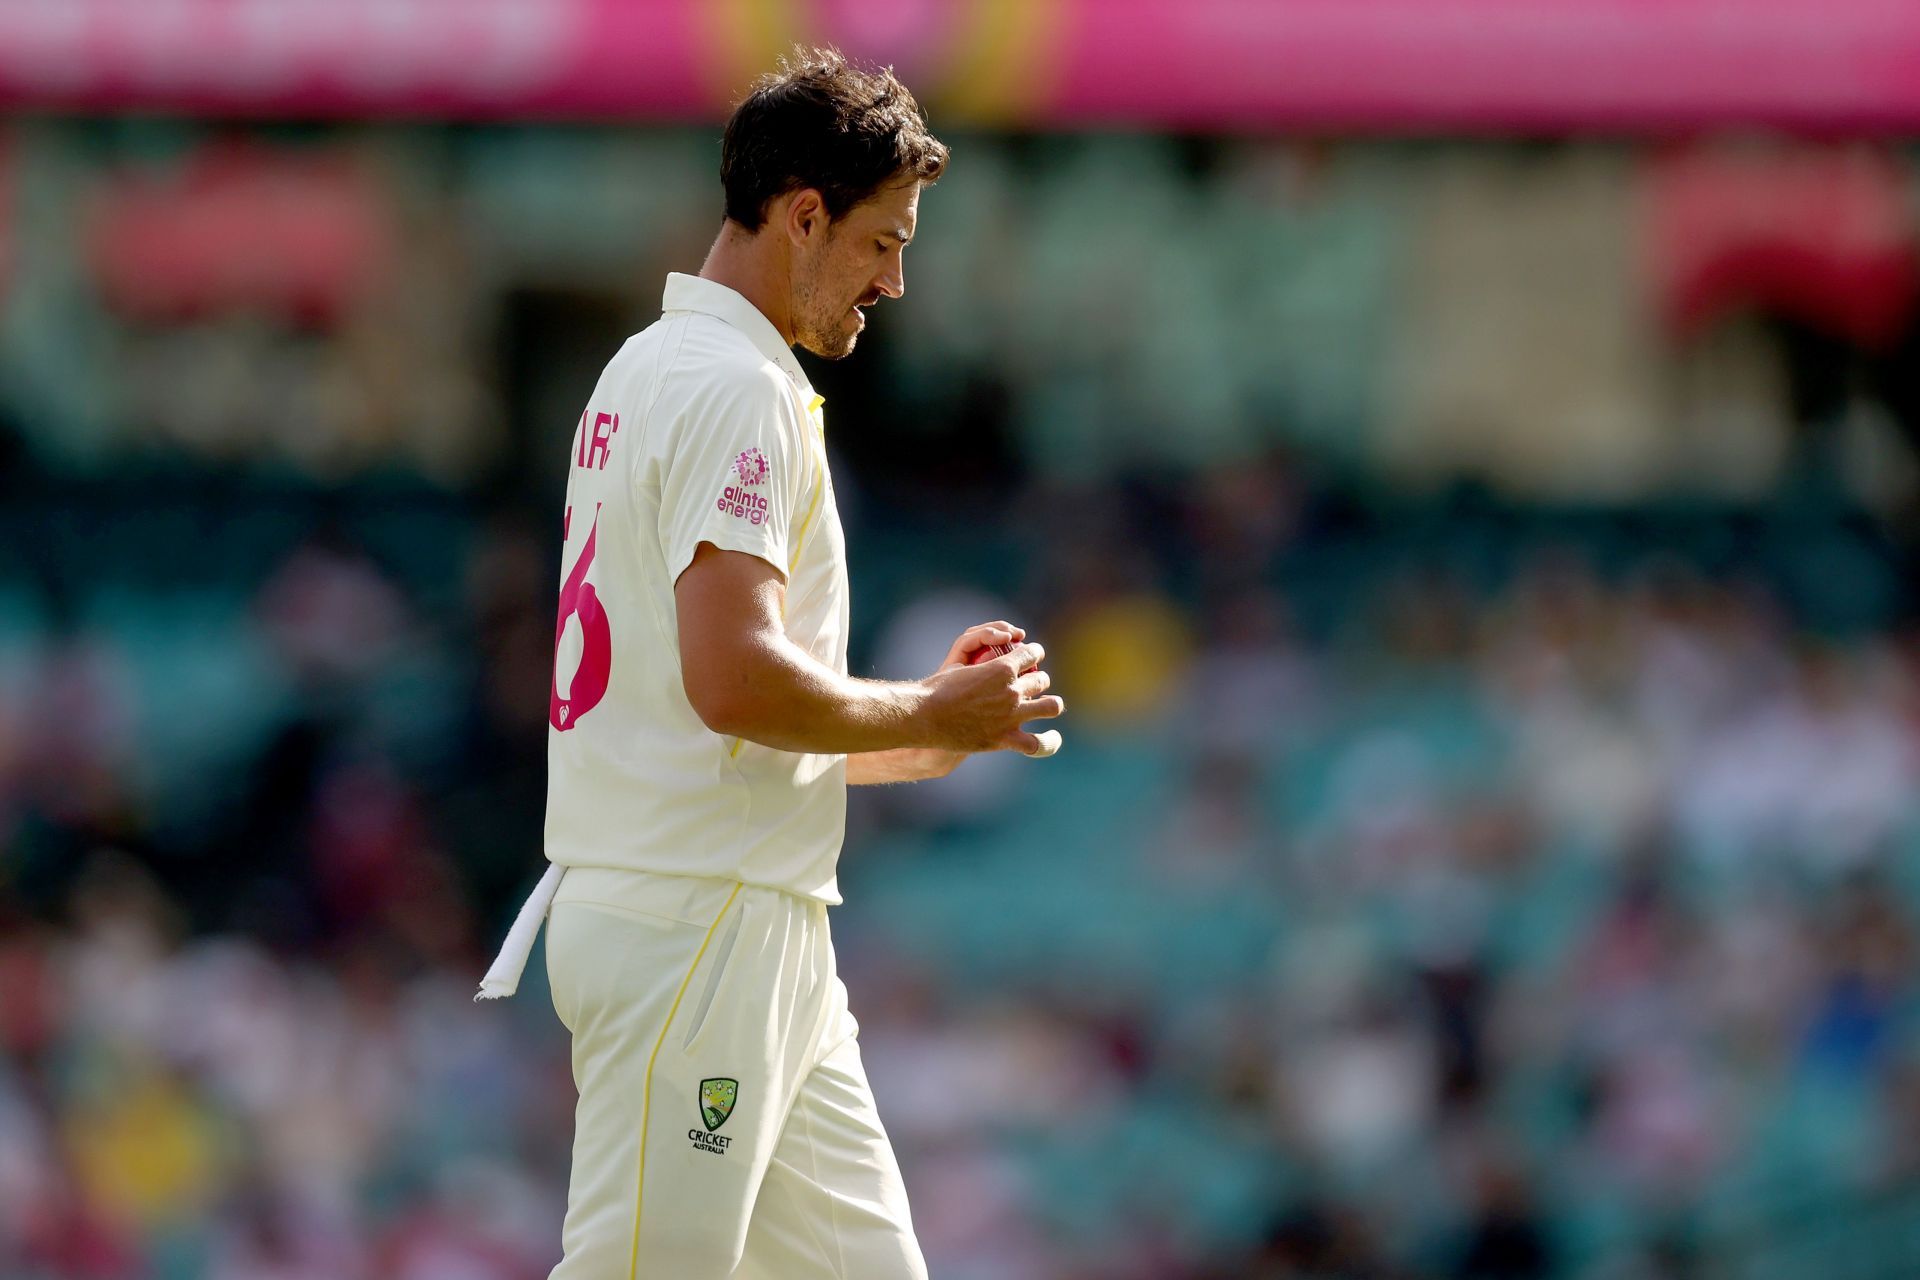 Mitchell Starc in action during the Ashes. (Credits: Getty)